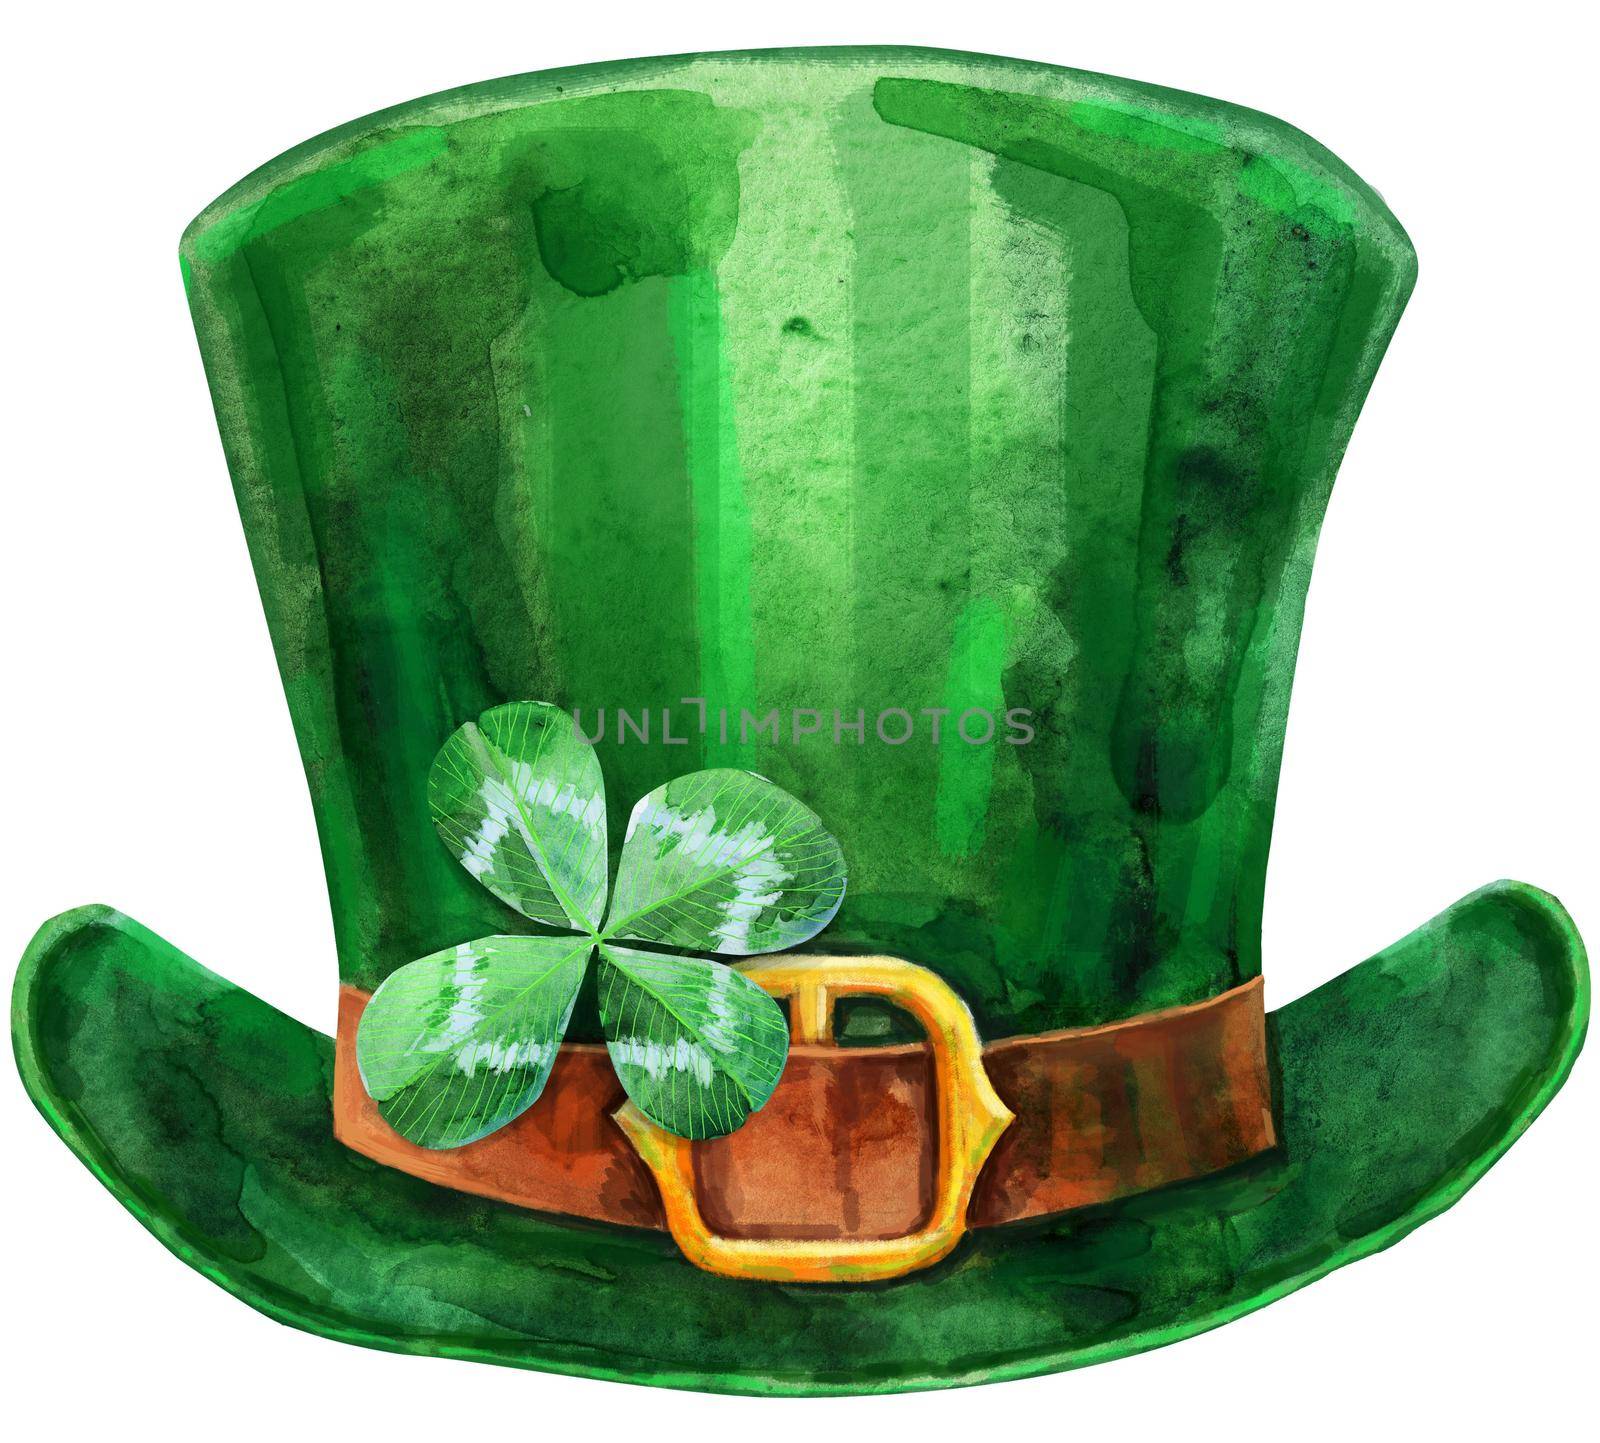 Watercolor Leprechaun Hat with clover leaf, St Patrick's Day Hat Illustration by NataOmsk